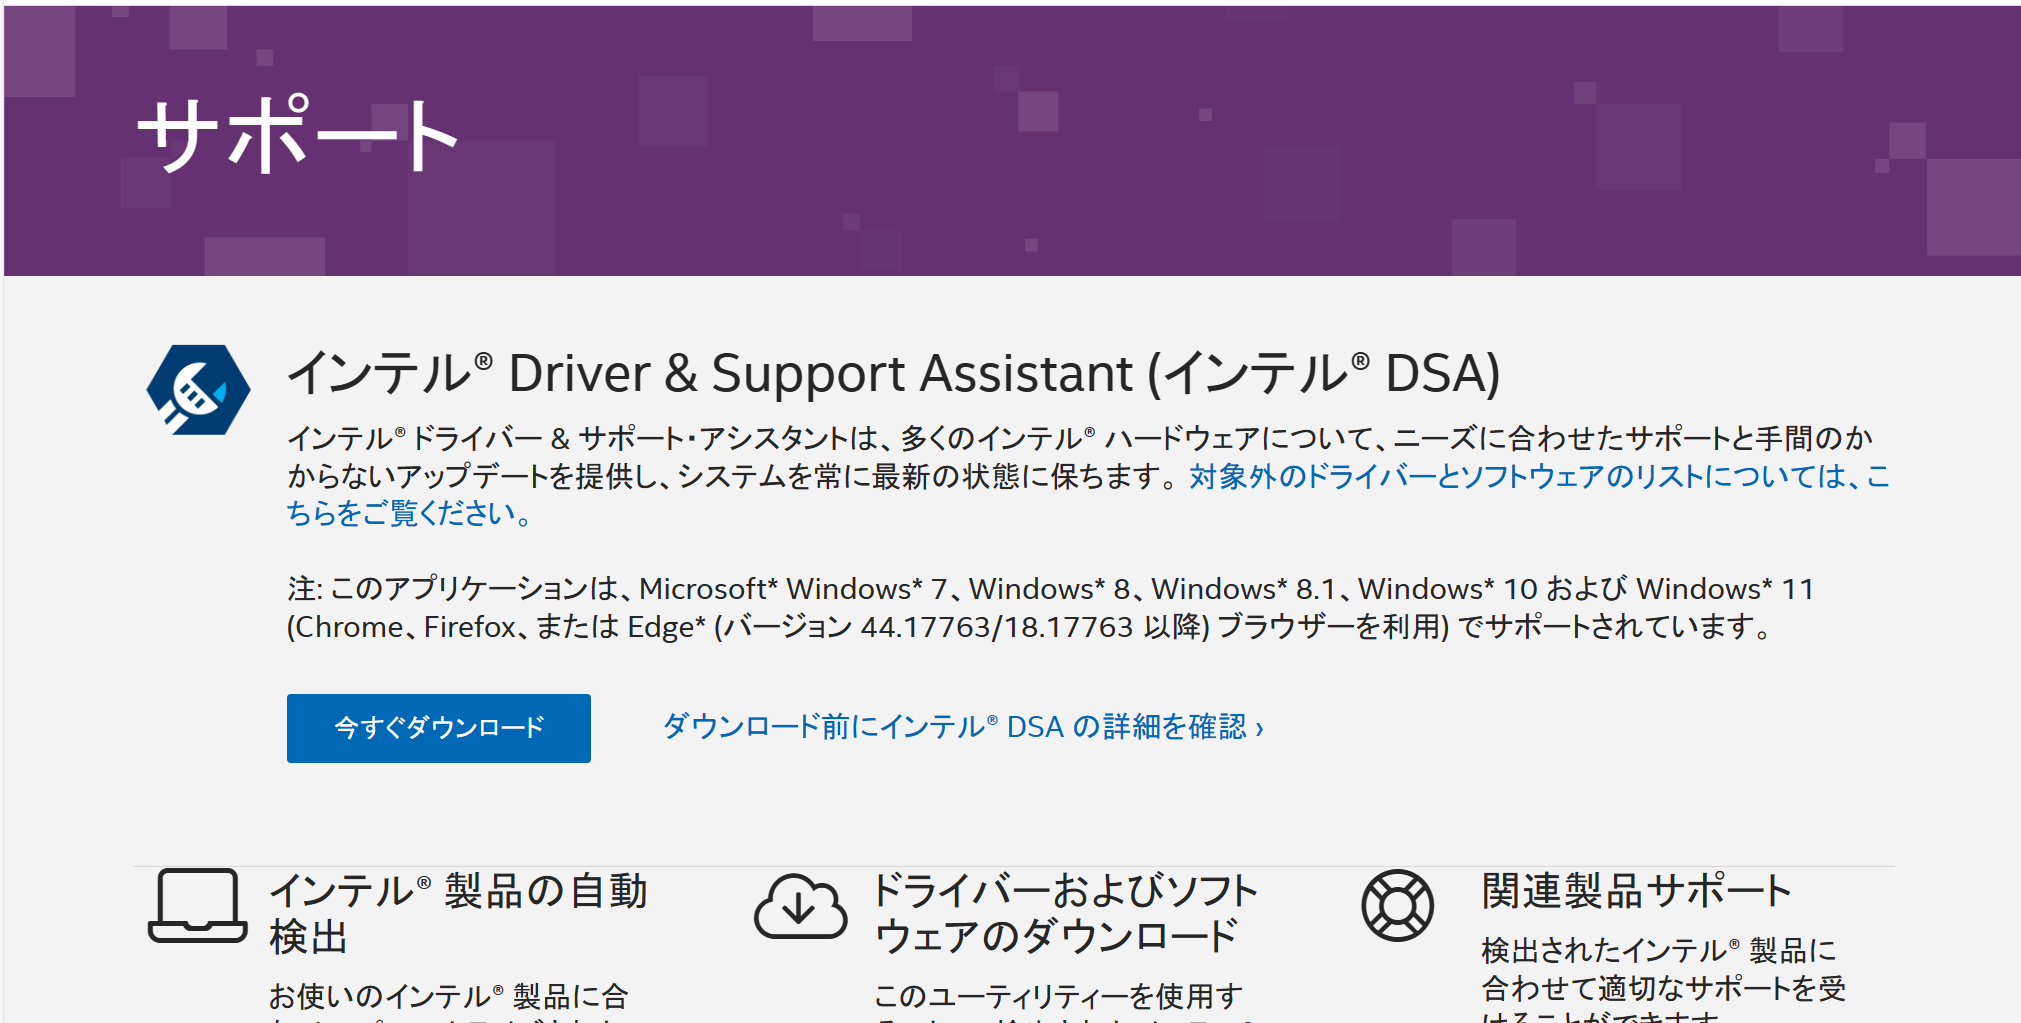 Intel Dirver & Support Assistant